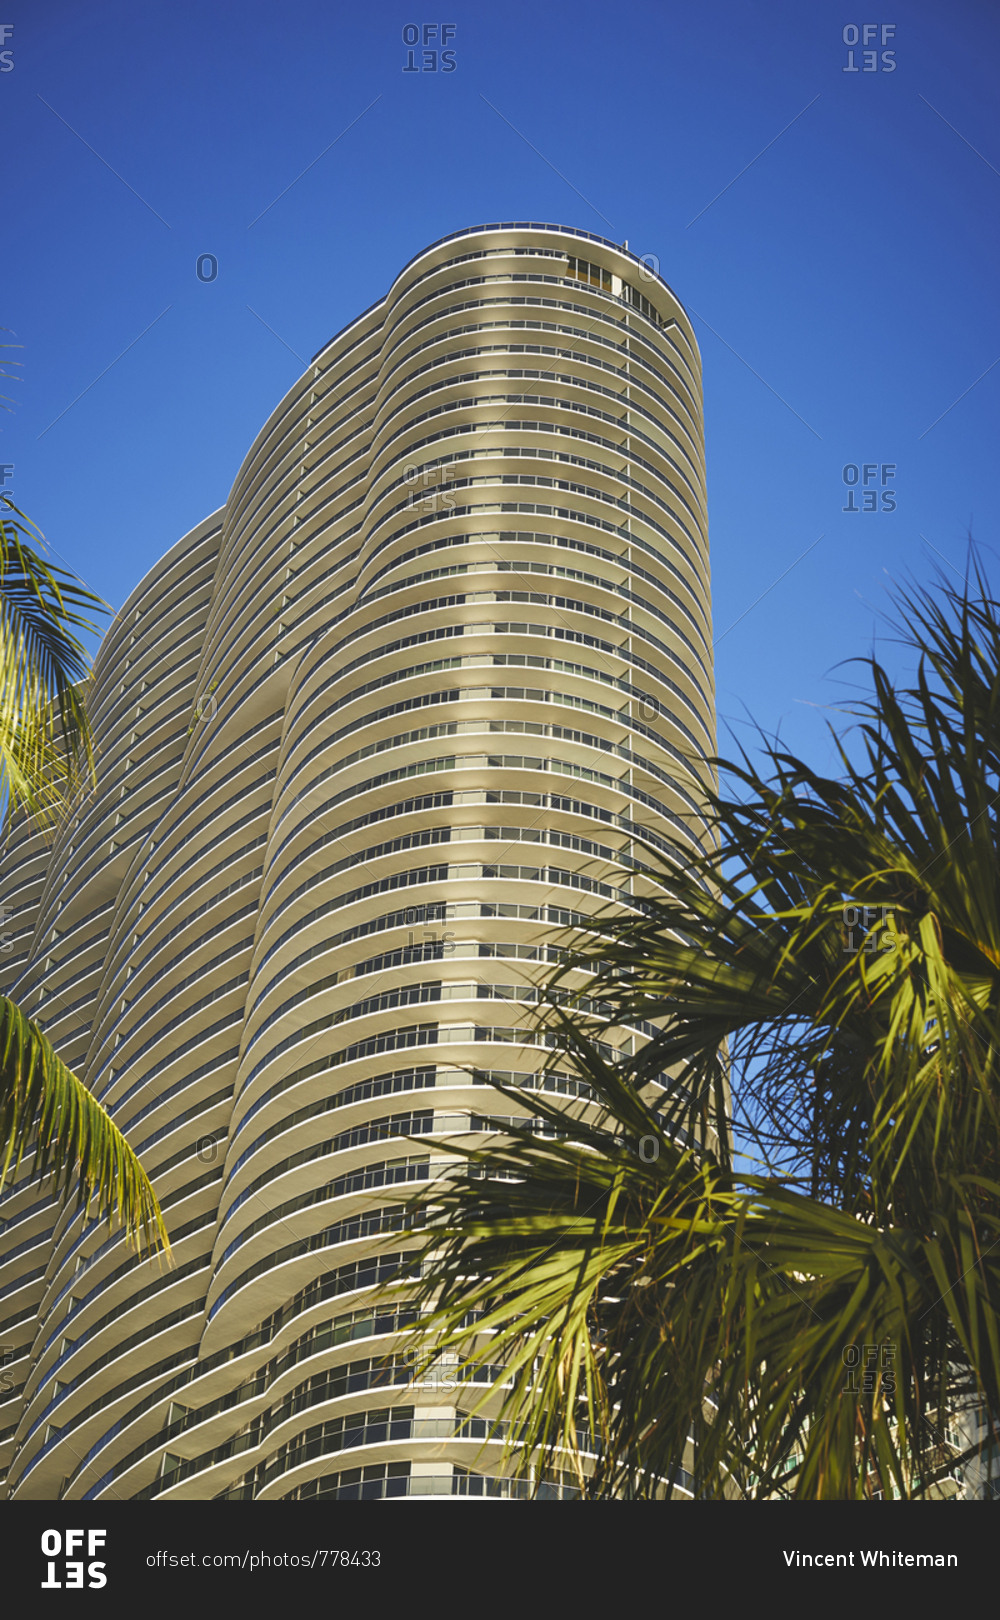 A view looking up through some palm trees to a tall hotel or condo building with round edges and blue skies.